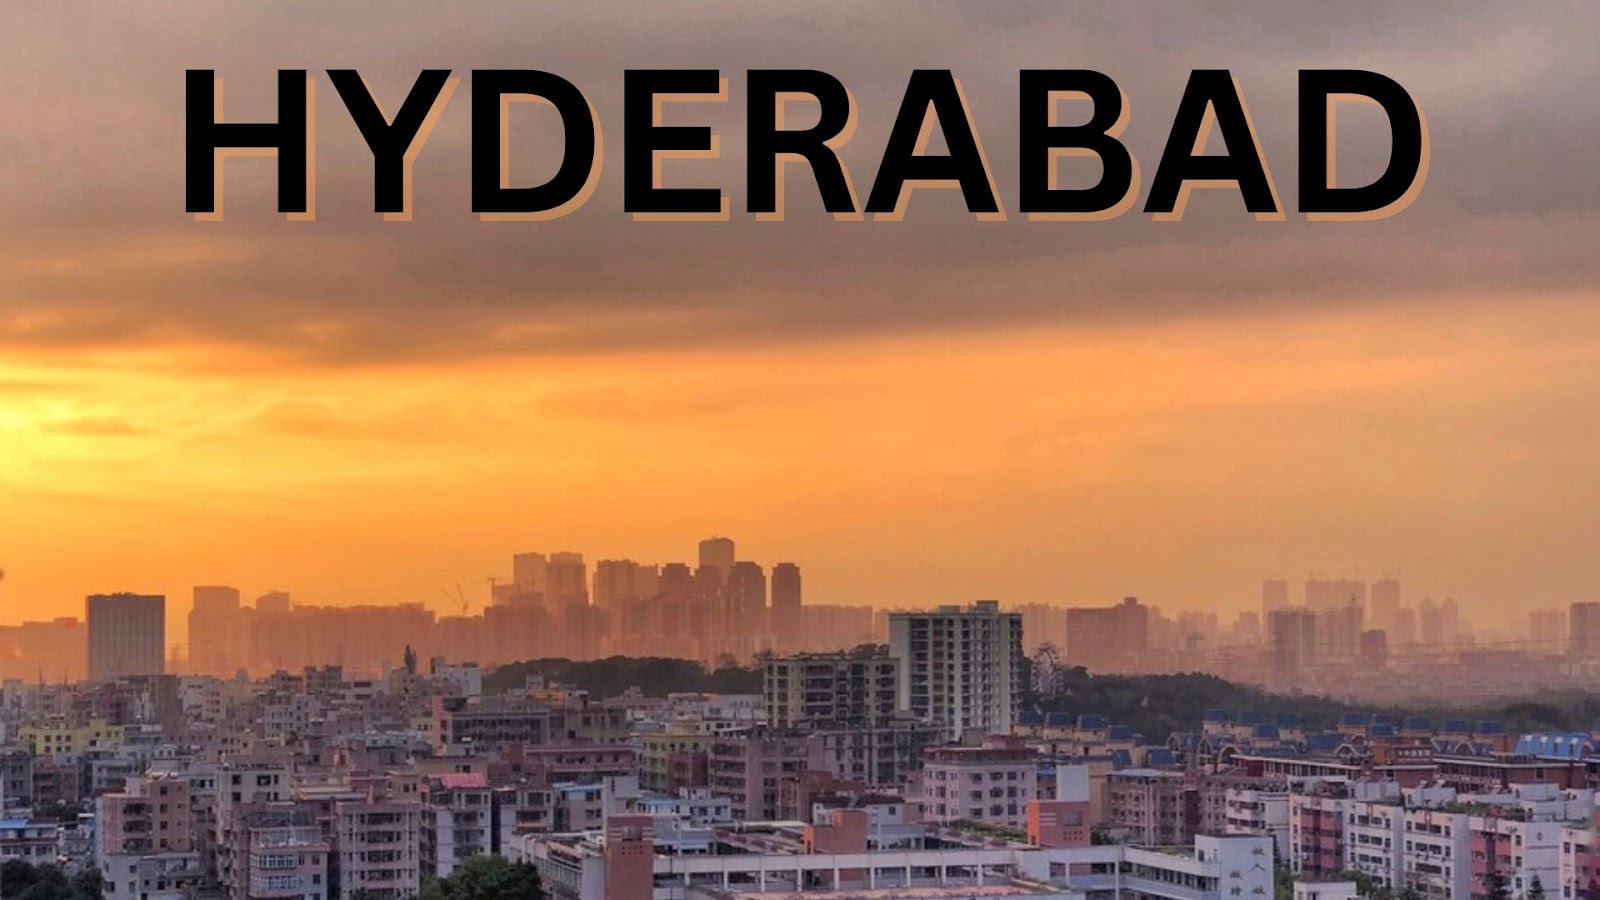 Hyderabad is known as an opportunity hub because of the numerous IT hubs available.